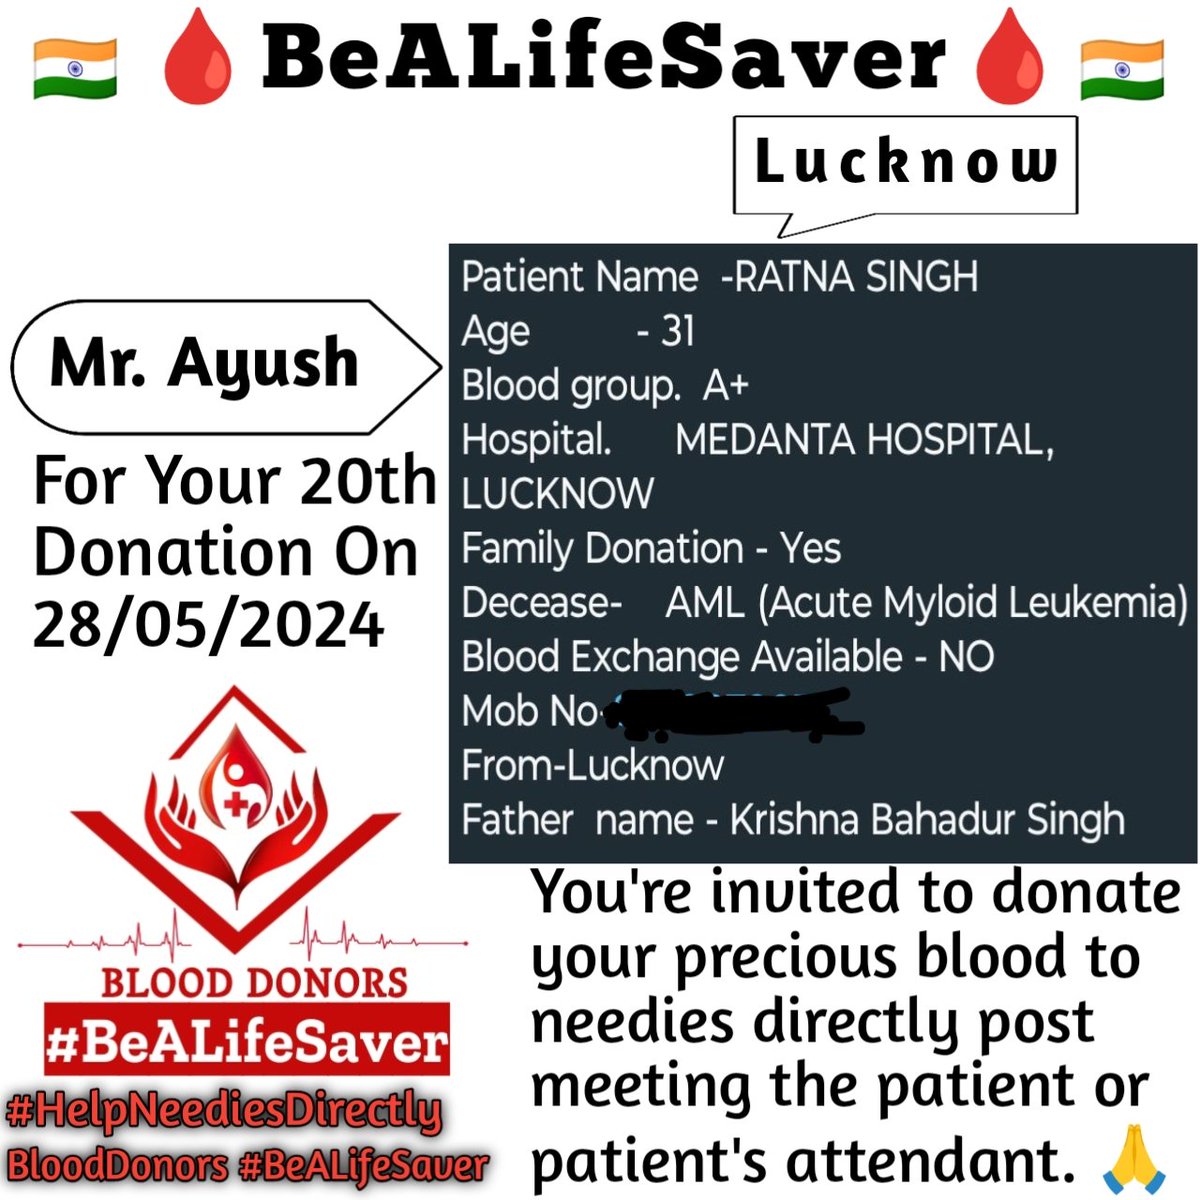 🙏 Congrats To Mr. Ayush Ji For His 20th Blood Donation 🙏 #HelpNeediesDirectly #BeALifeSaver Today's hero, Mr. Ayush Ji, donated blood in Lucknow for the 20th time to help a patient in need. Heartfelt gratitude and respect for his selfless act.